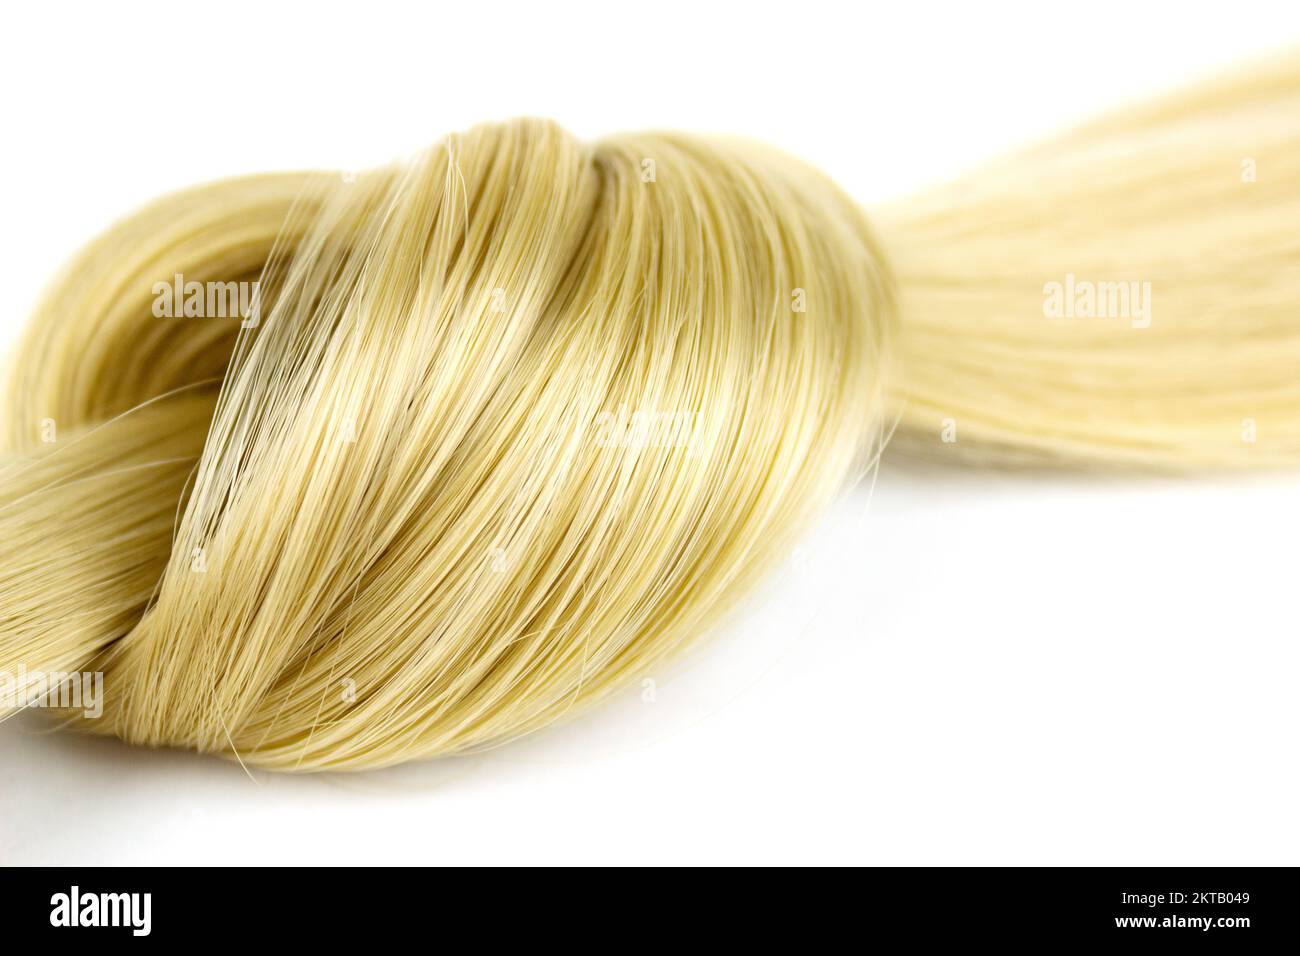 Blonde hair lock tied in knot. Strand of blond hair on white. Curls of hair. Blond wavy hair on white background Stock Photo